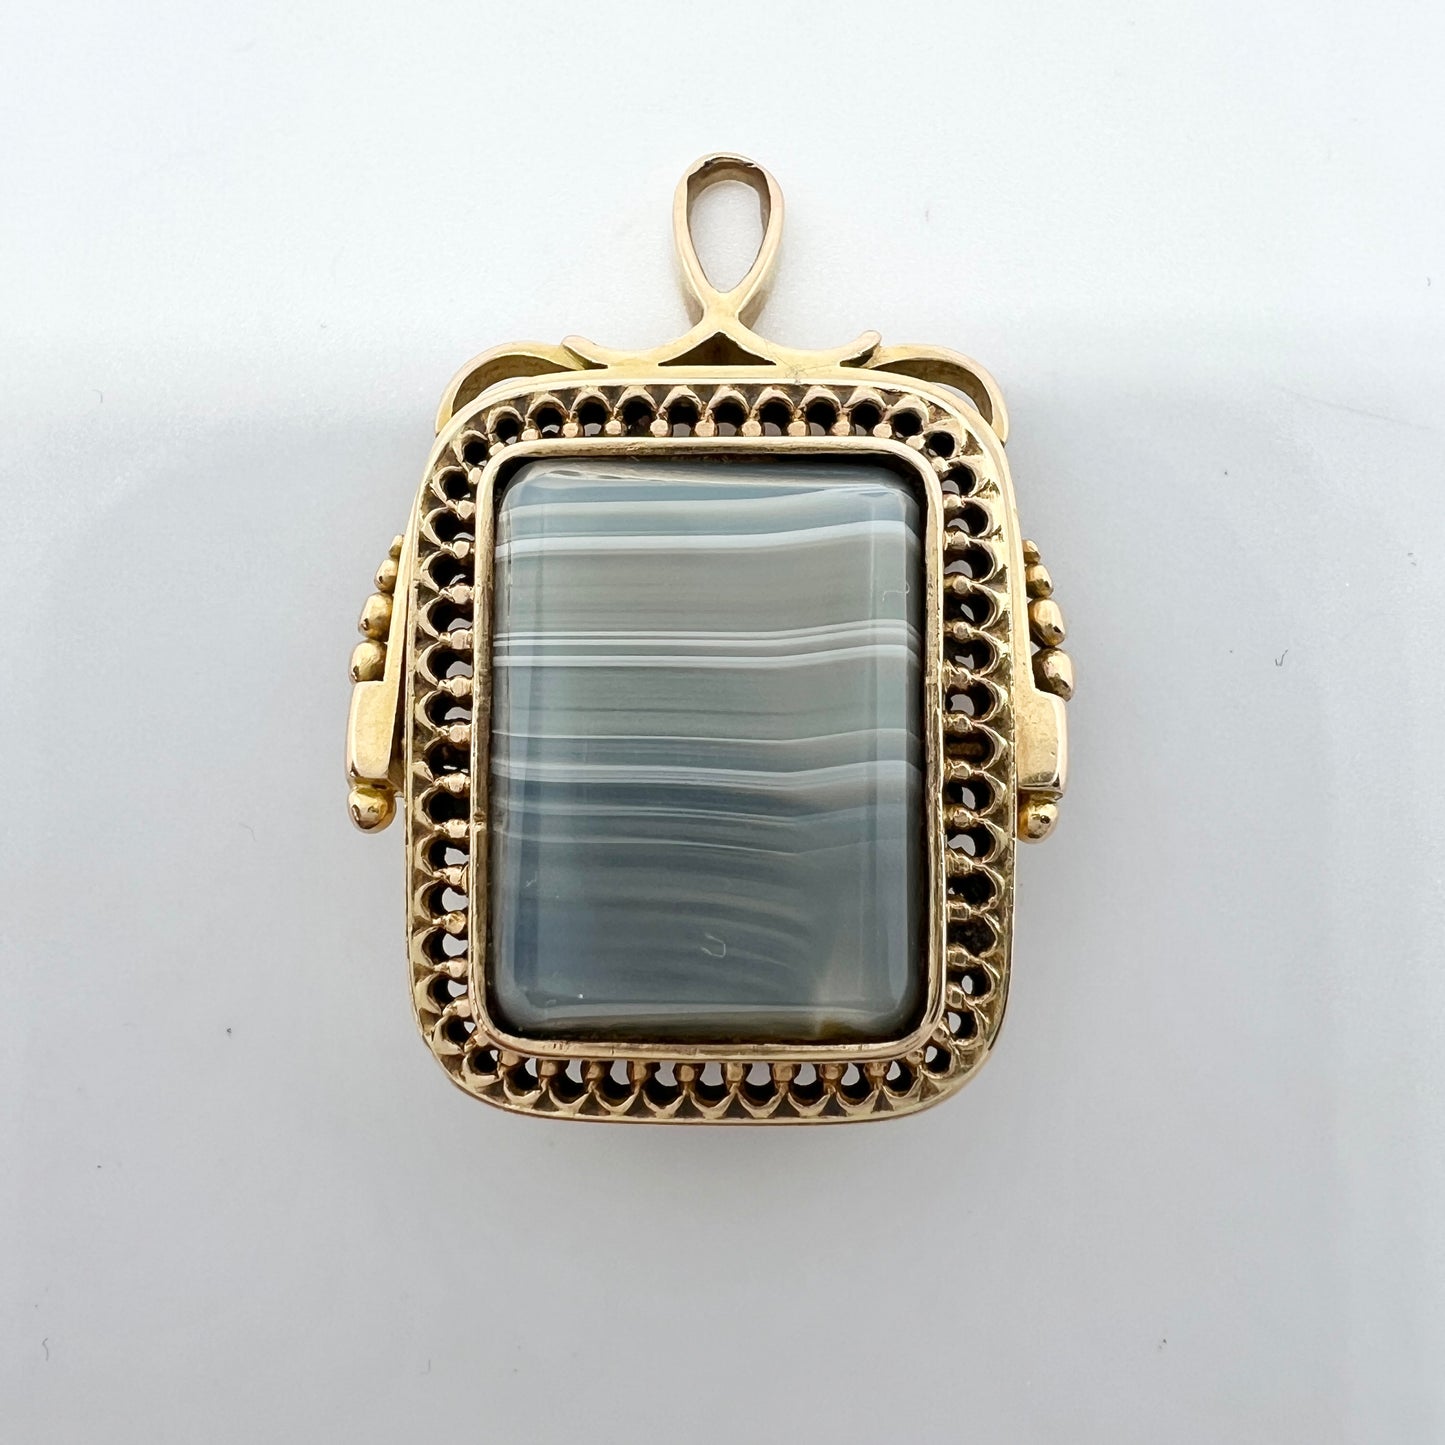 Antique c year 1900. 18k Gold Bloodstone Agate Seal Fob Pendant.